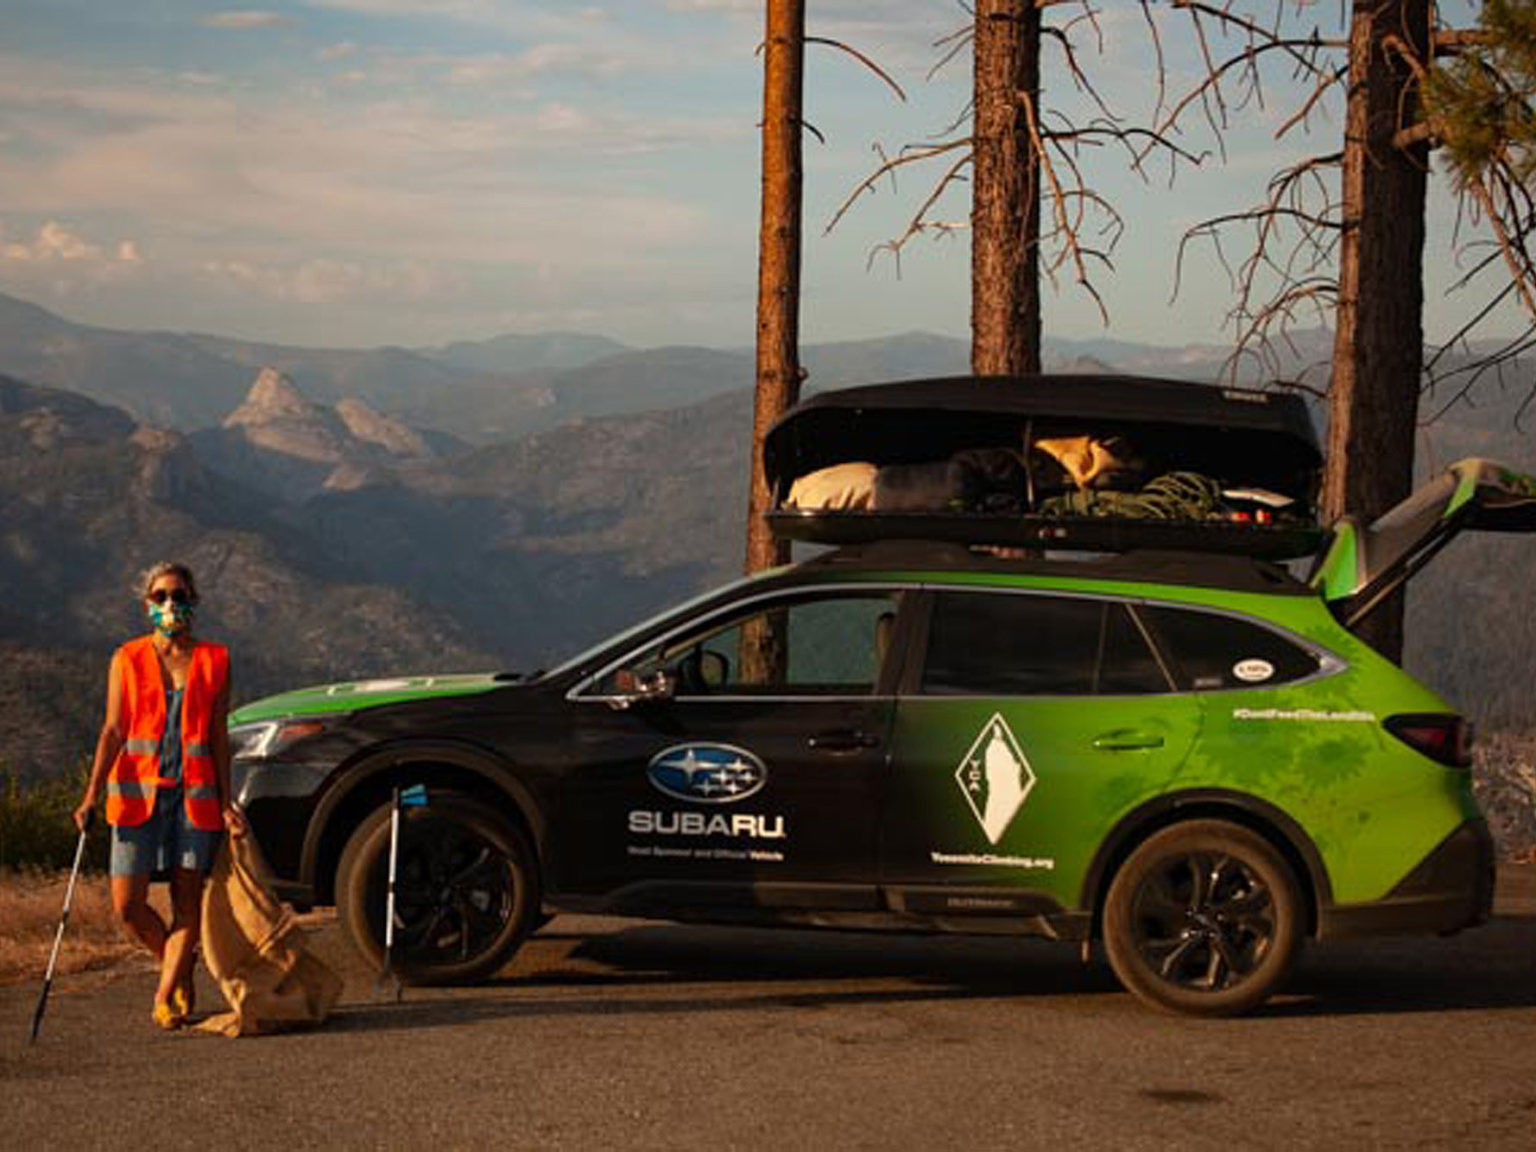 Subaru will co-host the first U.S. national litter clean-up and recycling initiative.